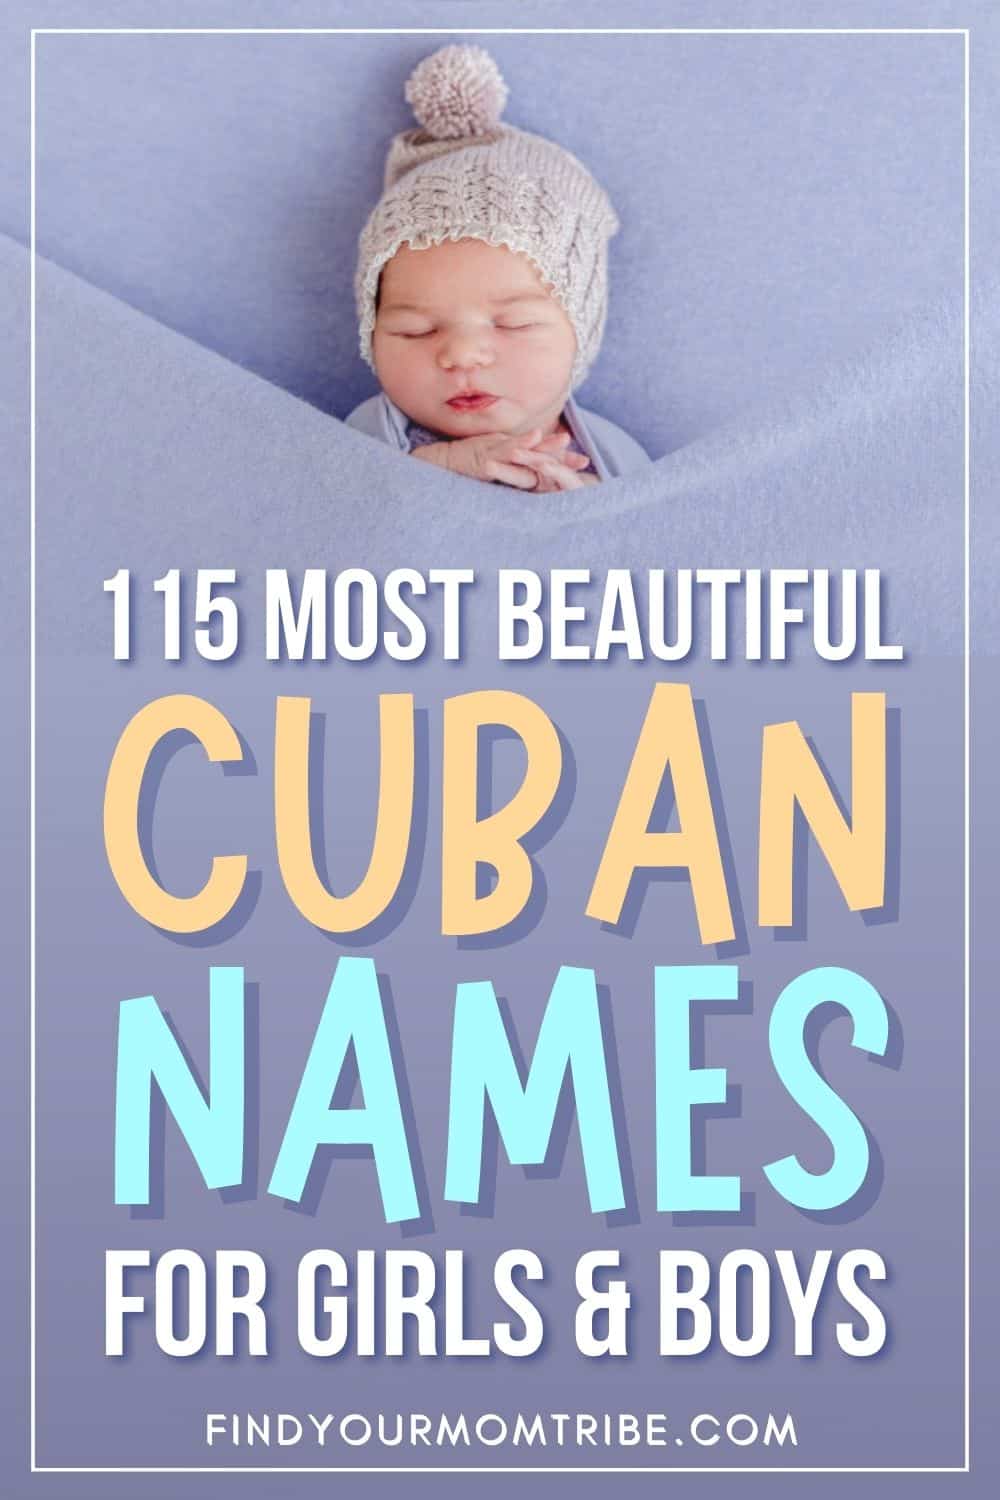 115 Most Beautiful Cuban Names For Girls And Boys With Meanings Pinterest